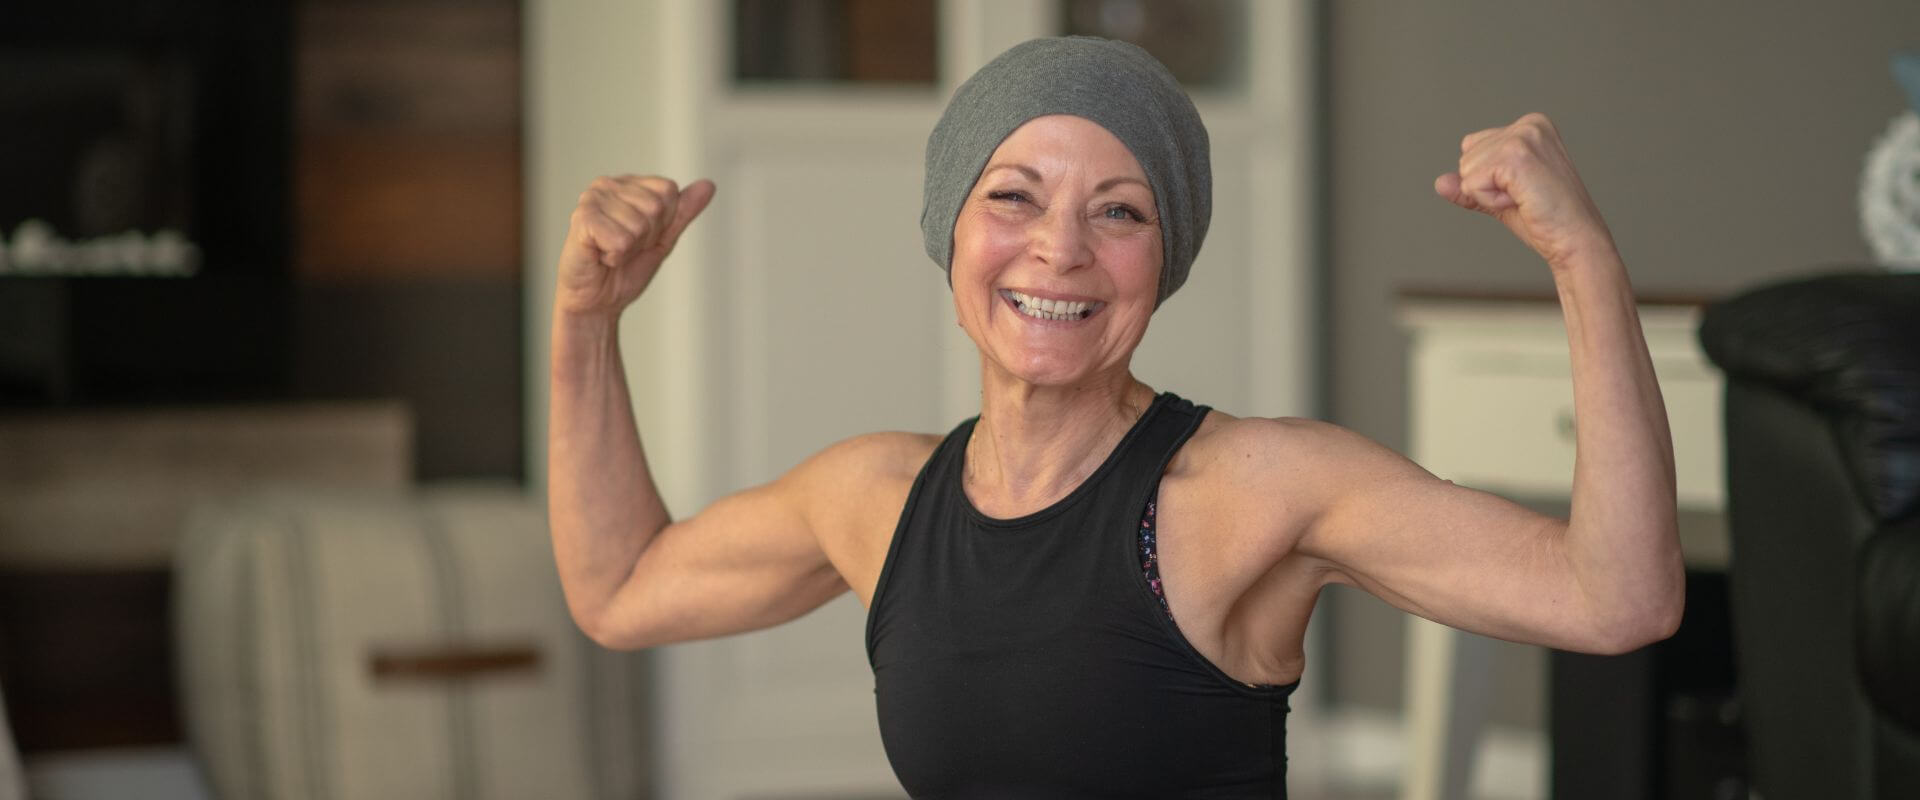 women diagnosed with cancer working out